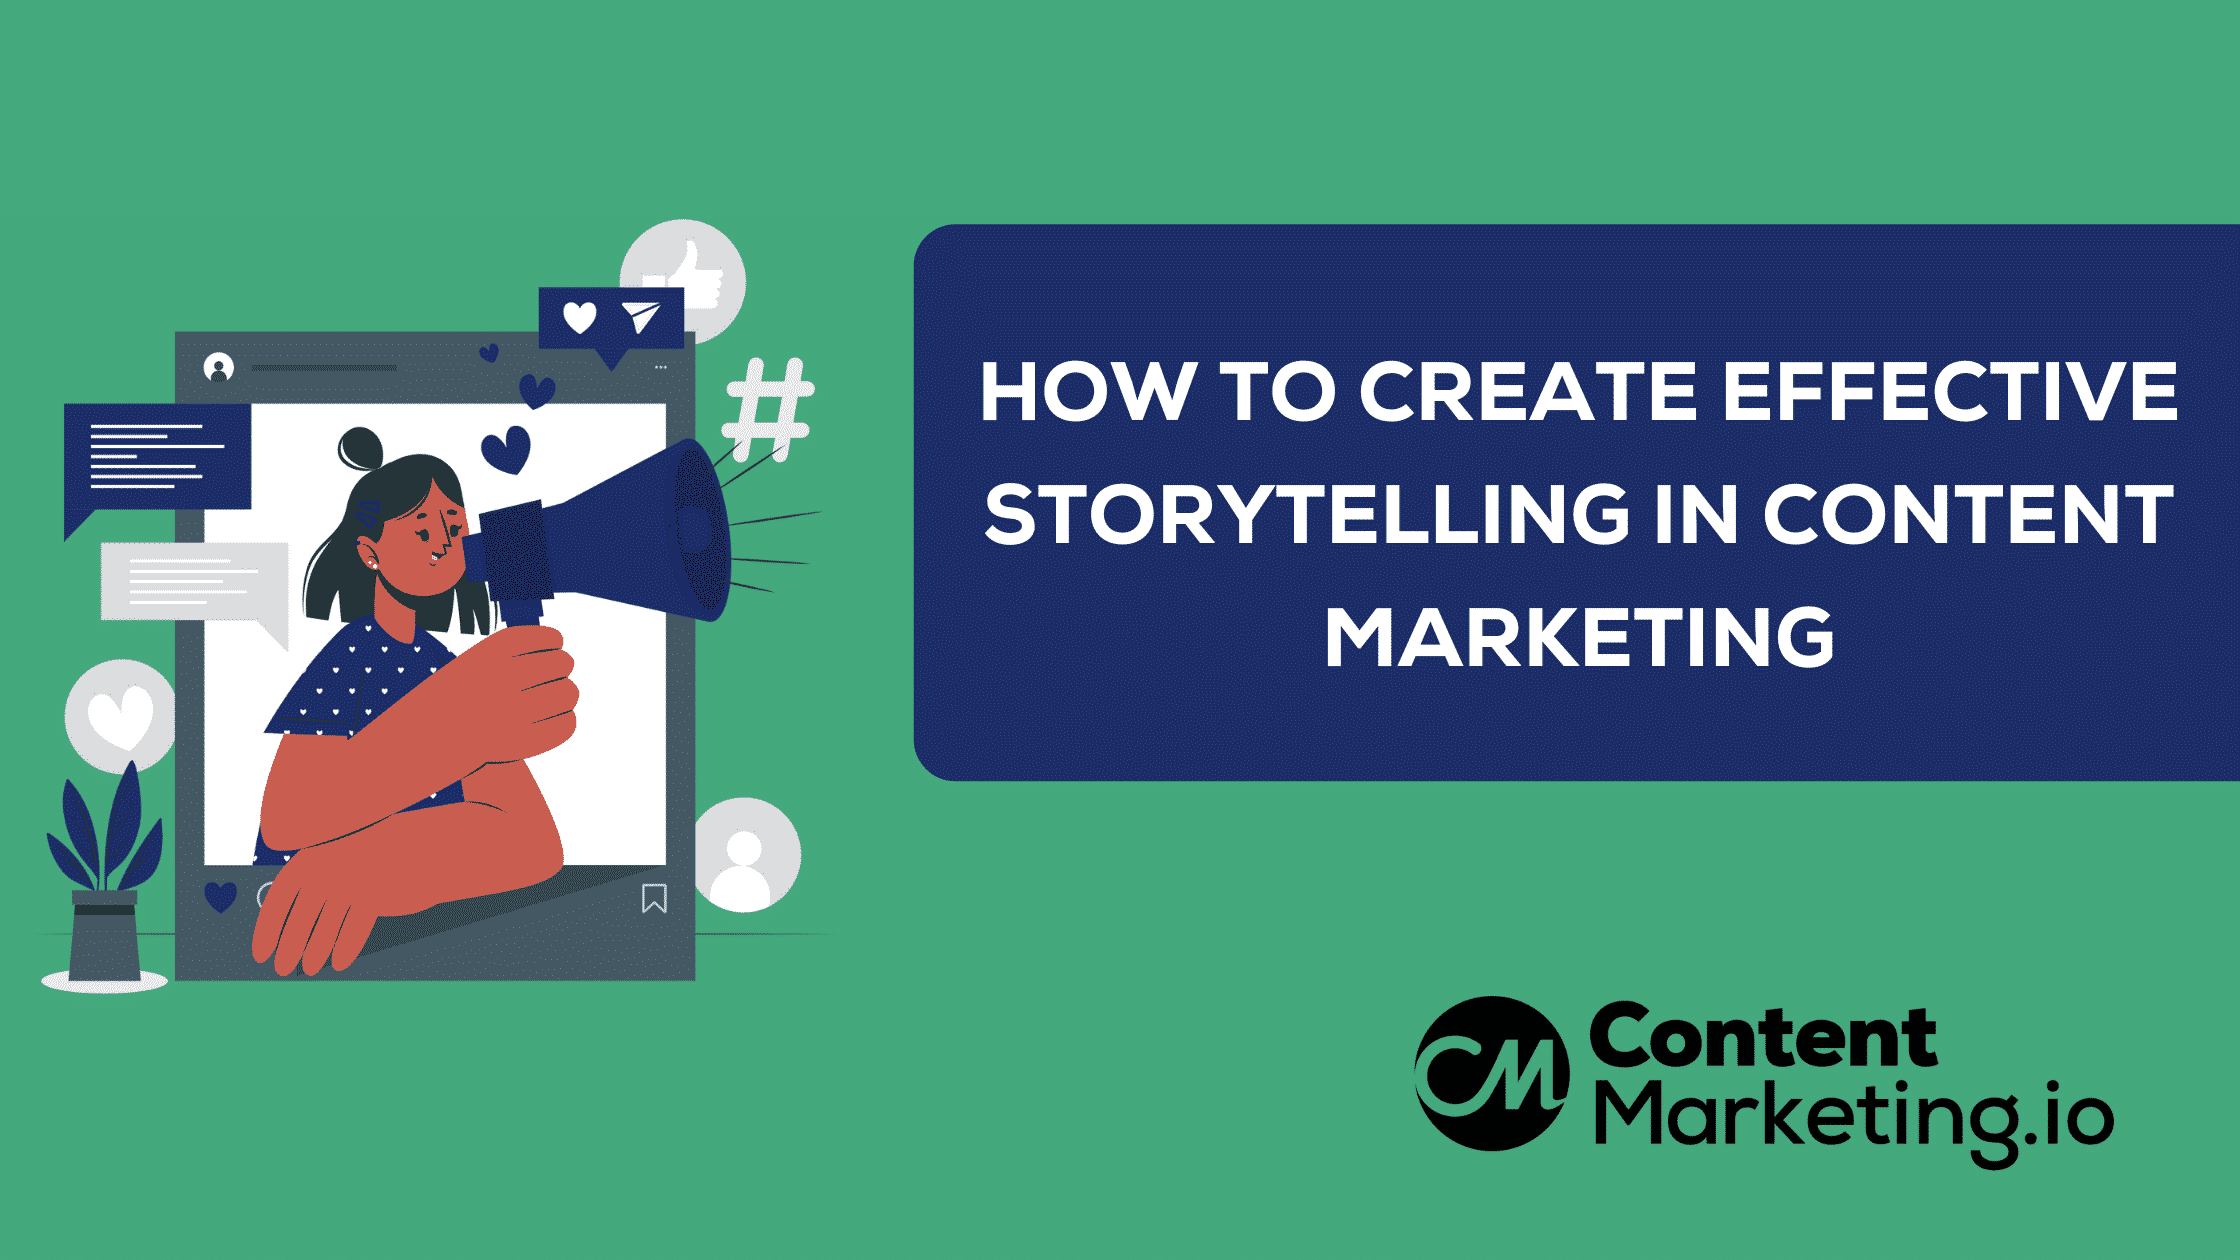 How to Create Effective Storytelling in Content Marketing